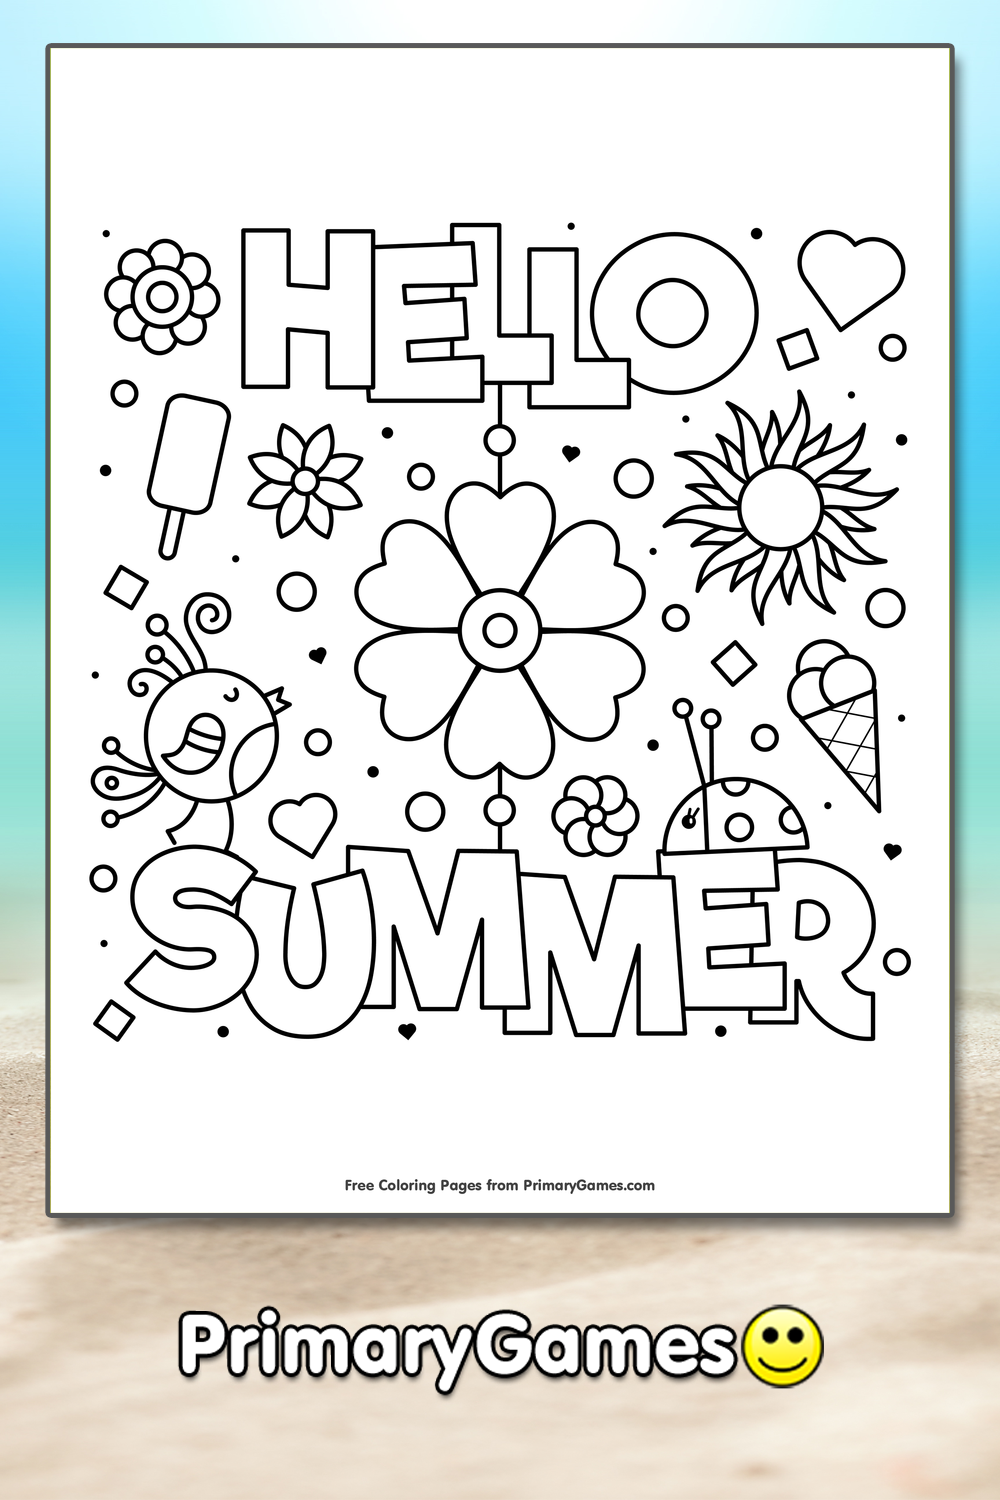 Hello Summer Coloring Page • FREE Printable PDF from PrimaryGames